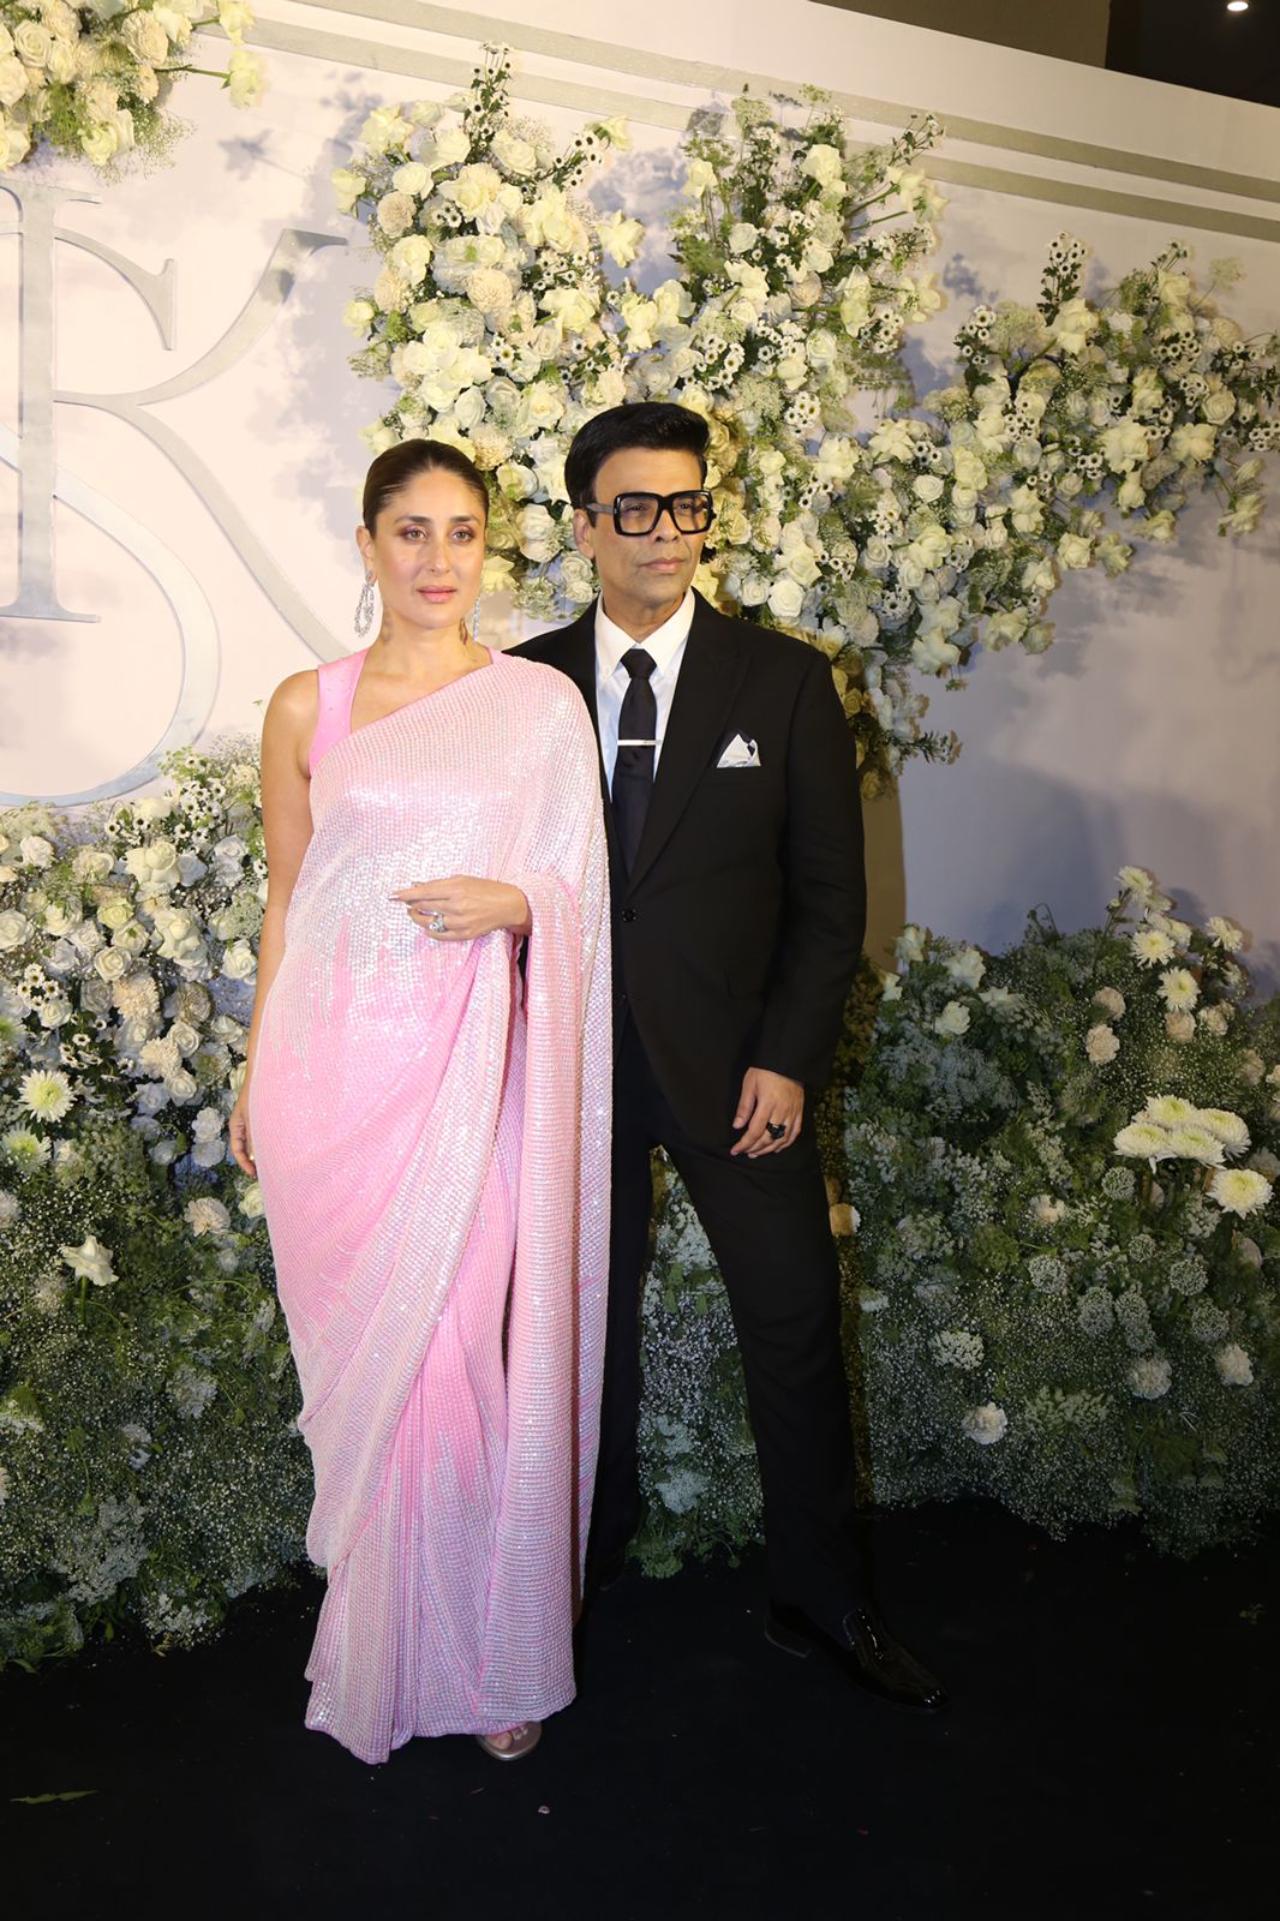 Kareena Kapoor Khan looked stunning in a pink saree. She posed with Karan Johar for the paparazzi before heading into the venue